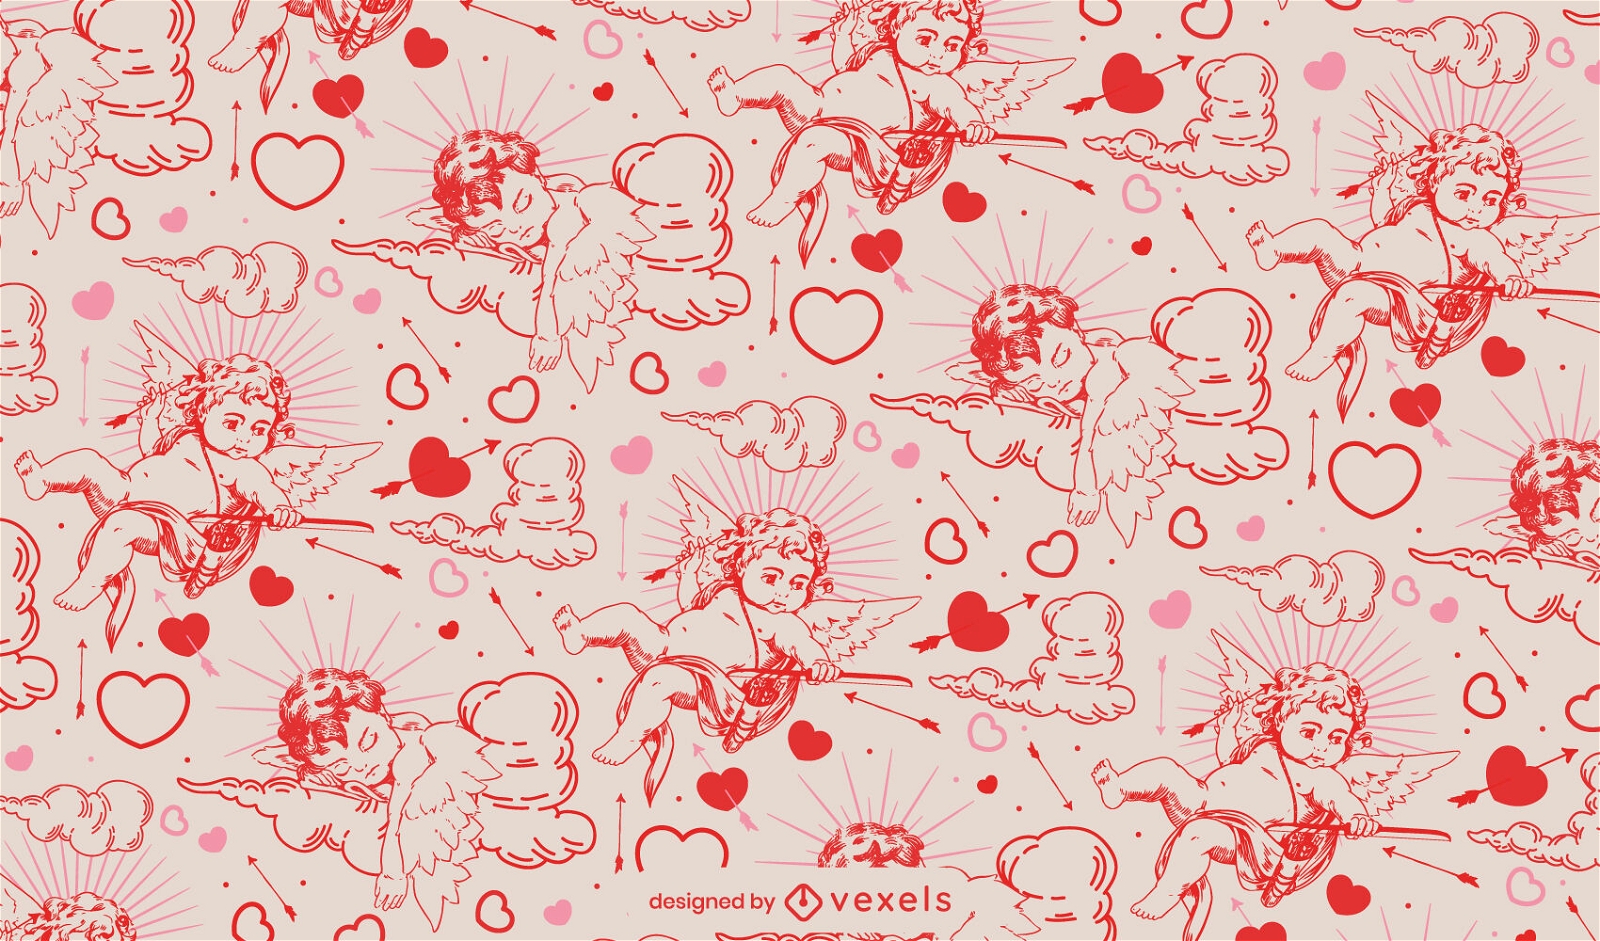 Valentines day holiday cupid pattern design